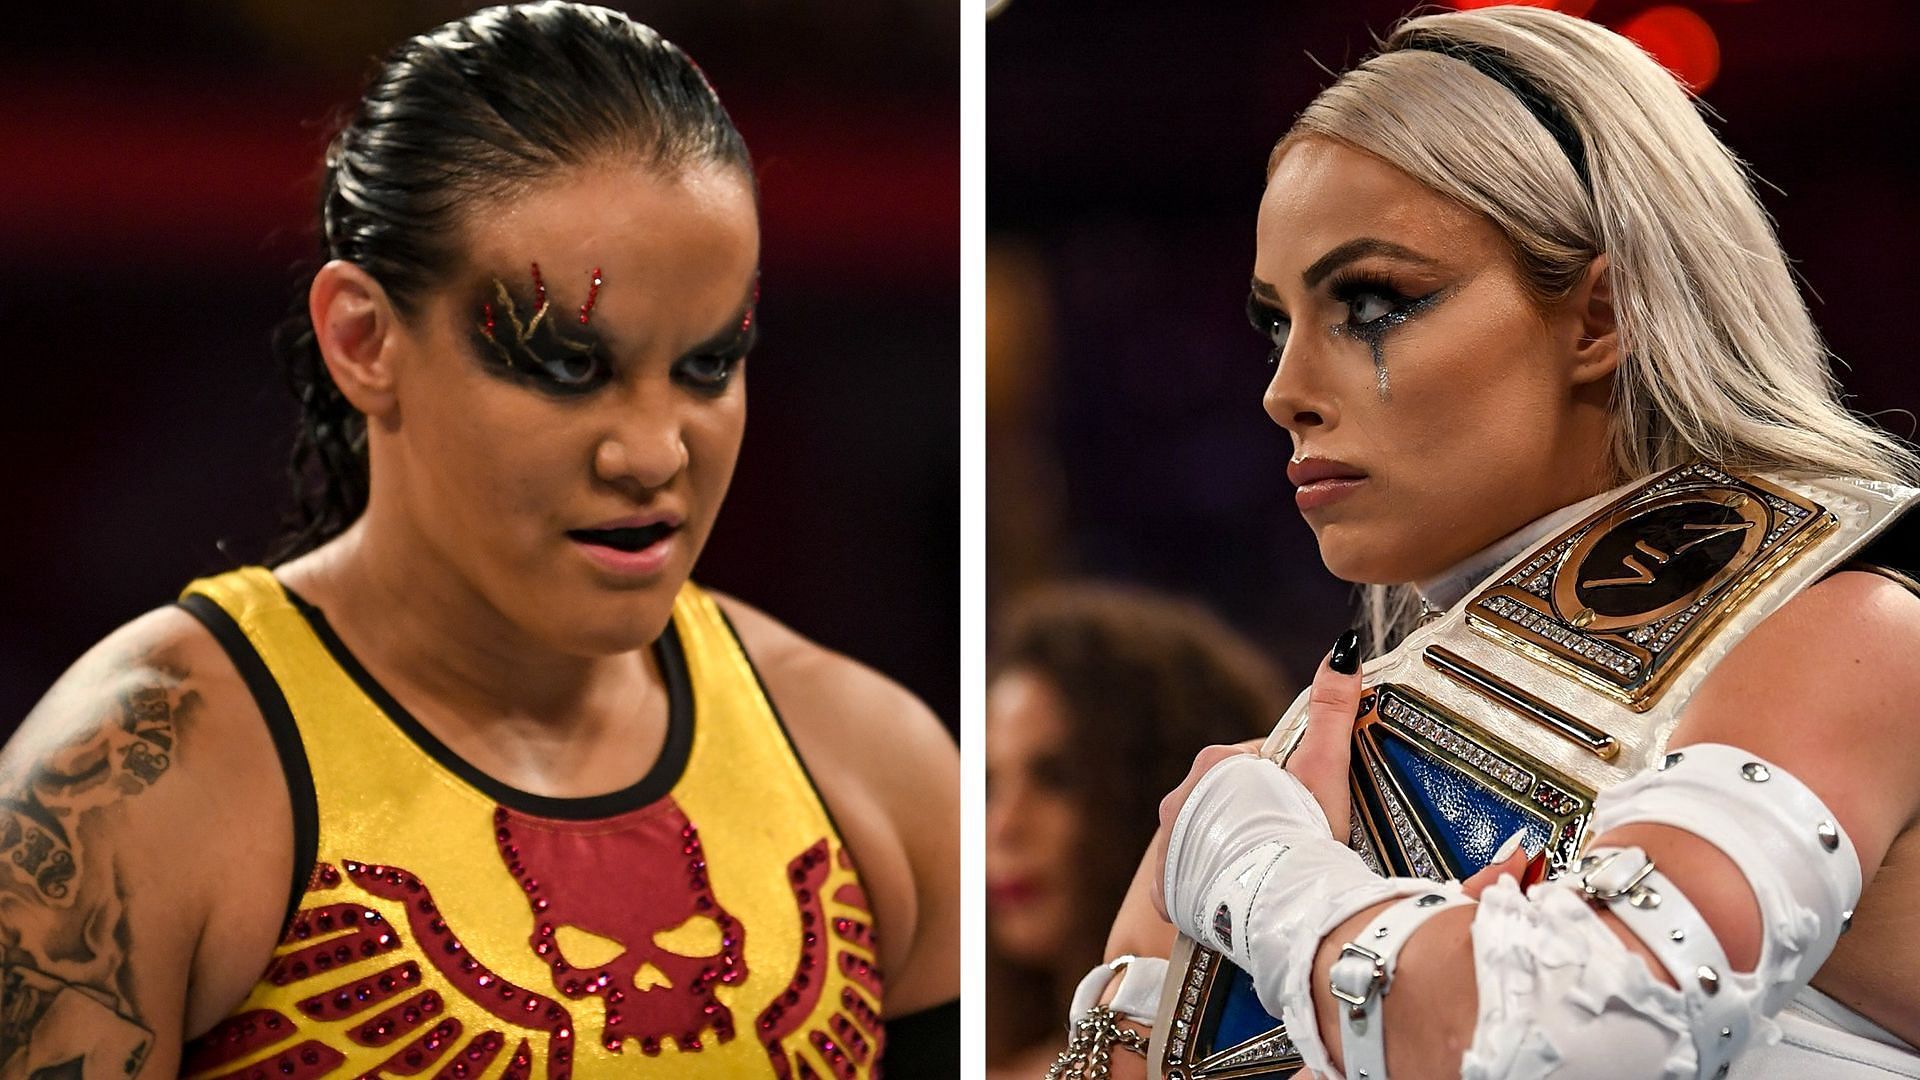 Shayna Baszler has been feuding with Liv Morgan on WWE SmackDown